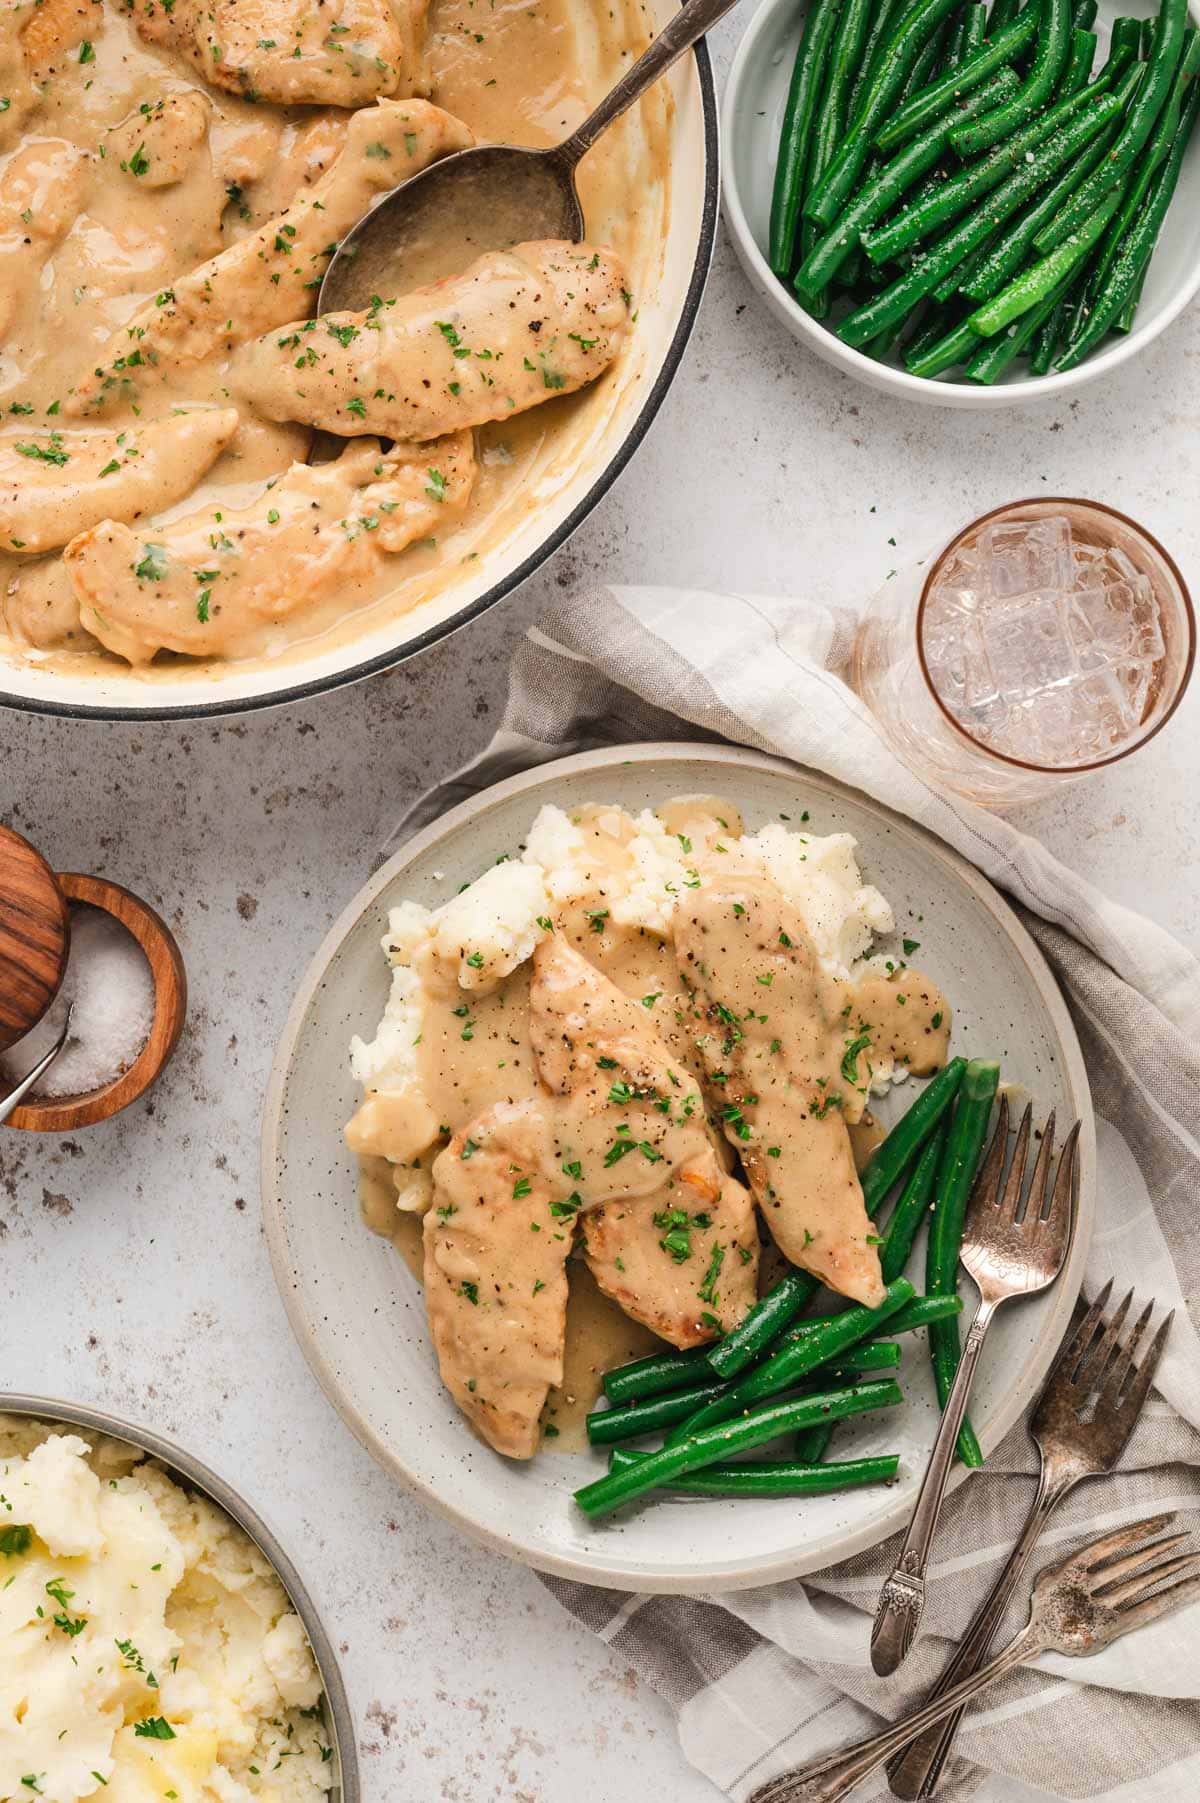 Chicken and gravy on a plate with mashed potatoes and green beans.